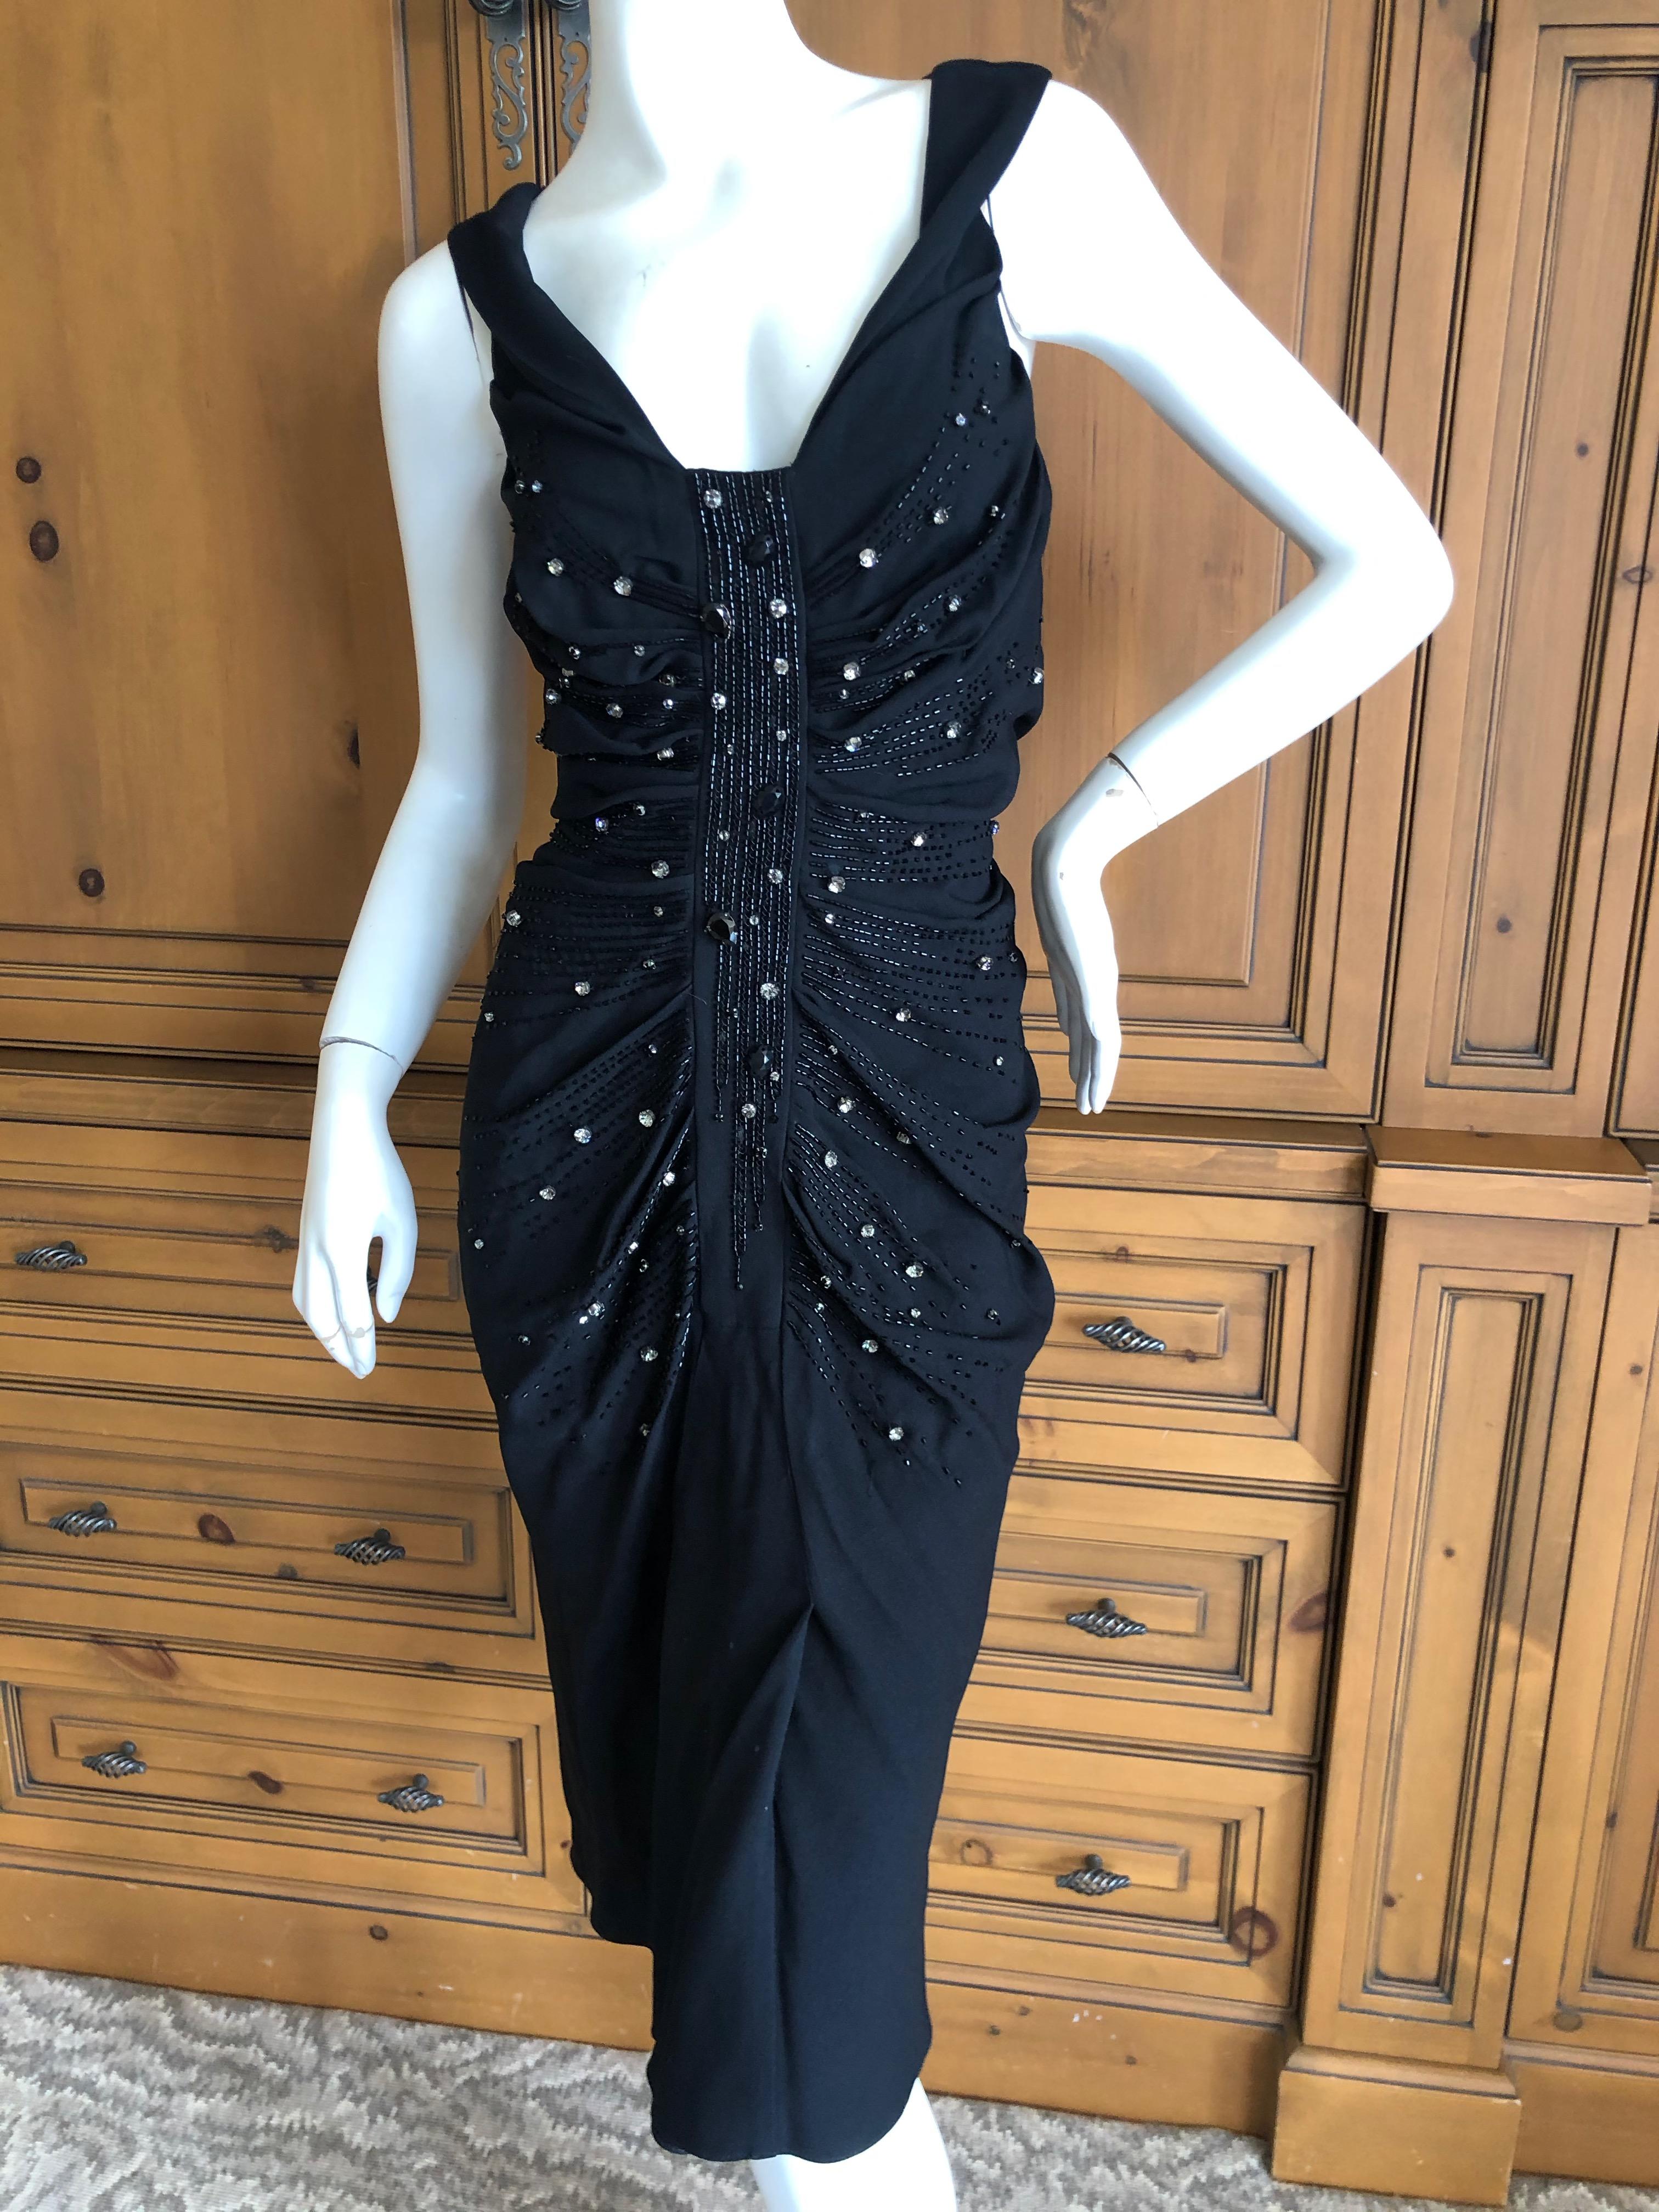 Christian Dior by John Galliano Black Cocktail Dress with Jewel Embellishments.
Please use the zoom feature to see the beautiful details.
 Size 40
 Bust 36